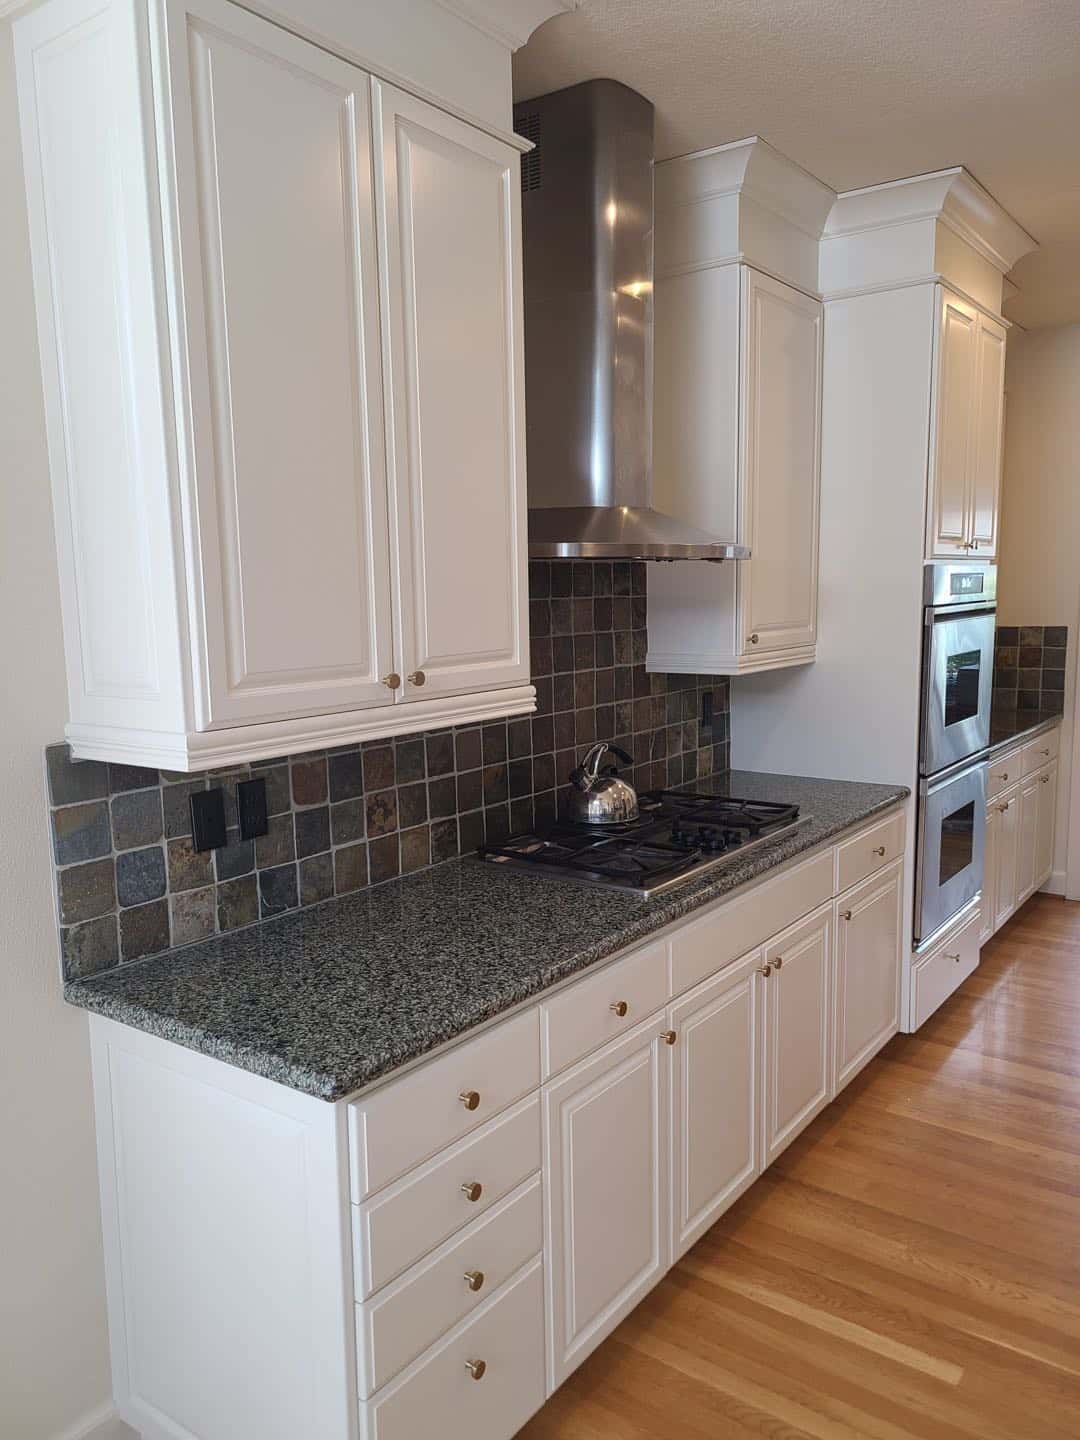 Photo of Cabinets and handrail project in SW Portland in Portland, Oregon